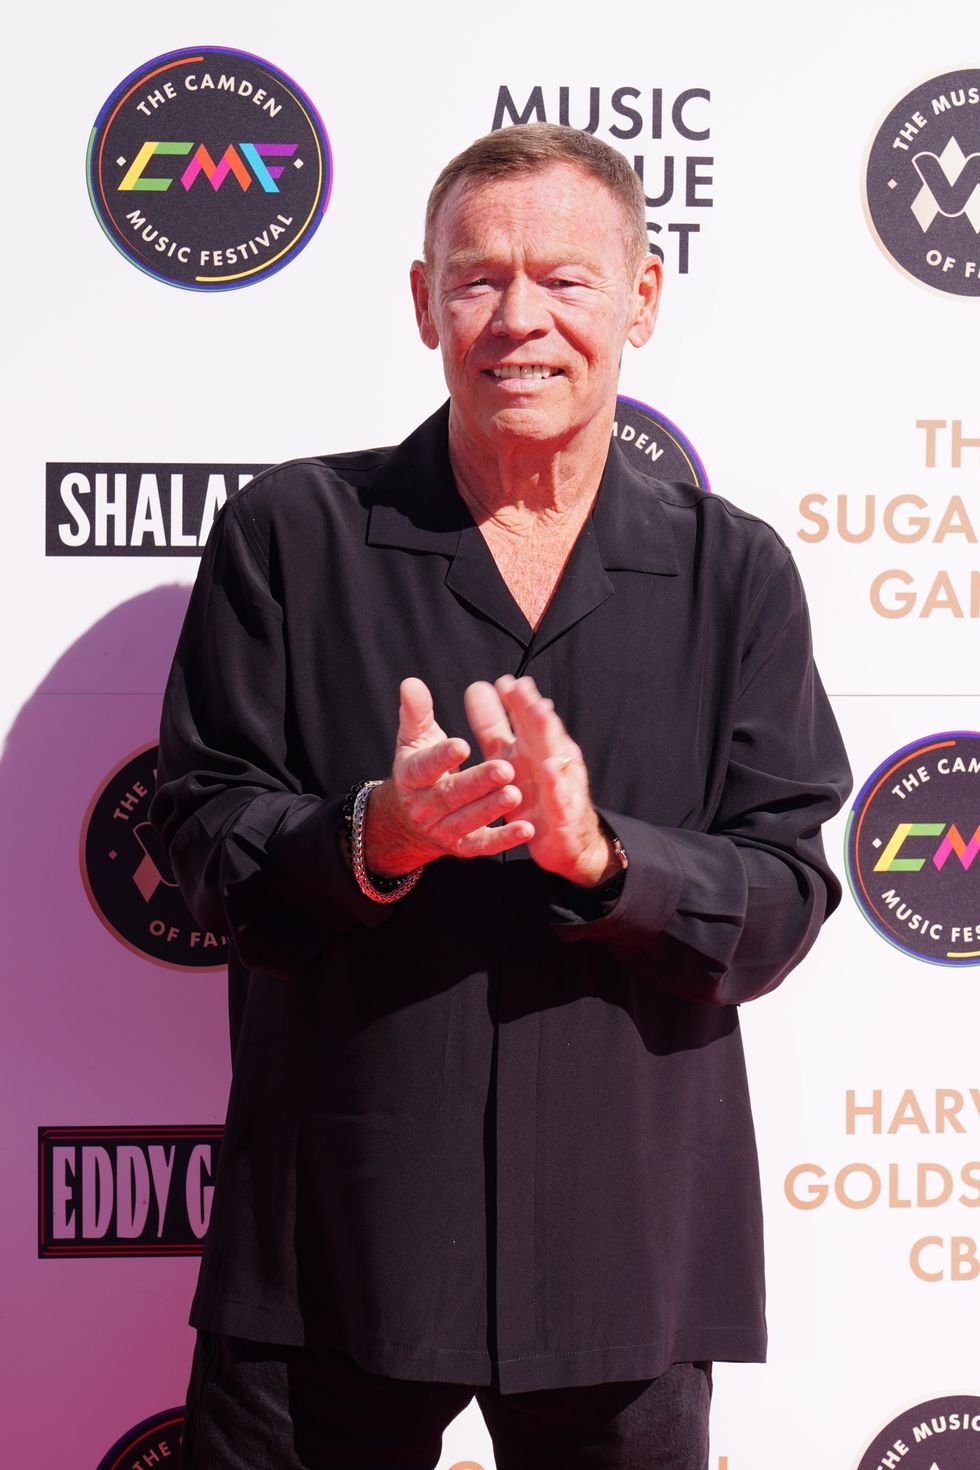 UB40 star Ali Campbell says Walk Of Fame honour is a full circle moment